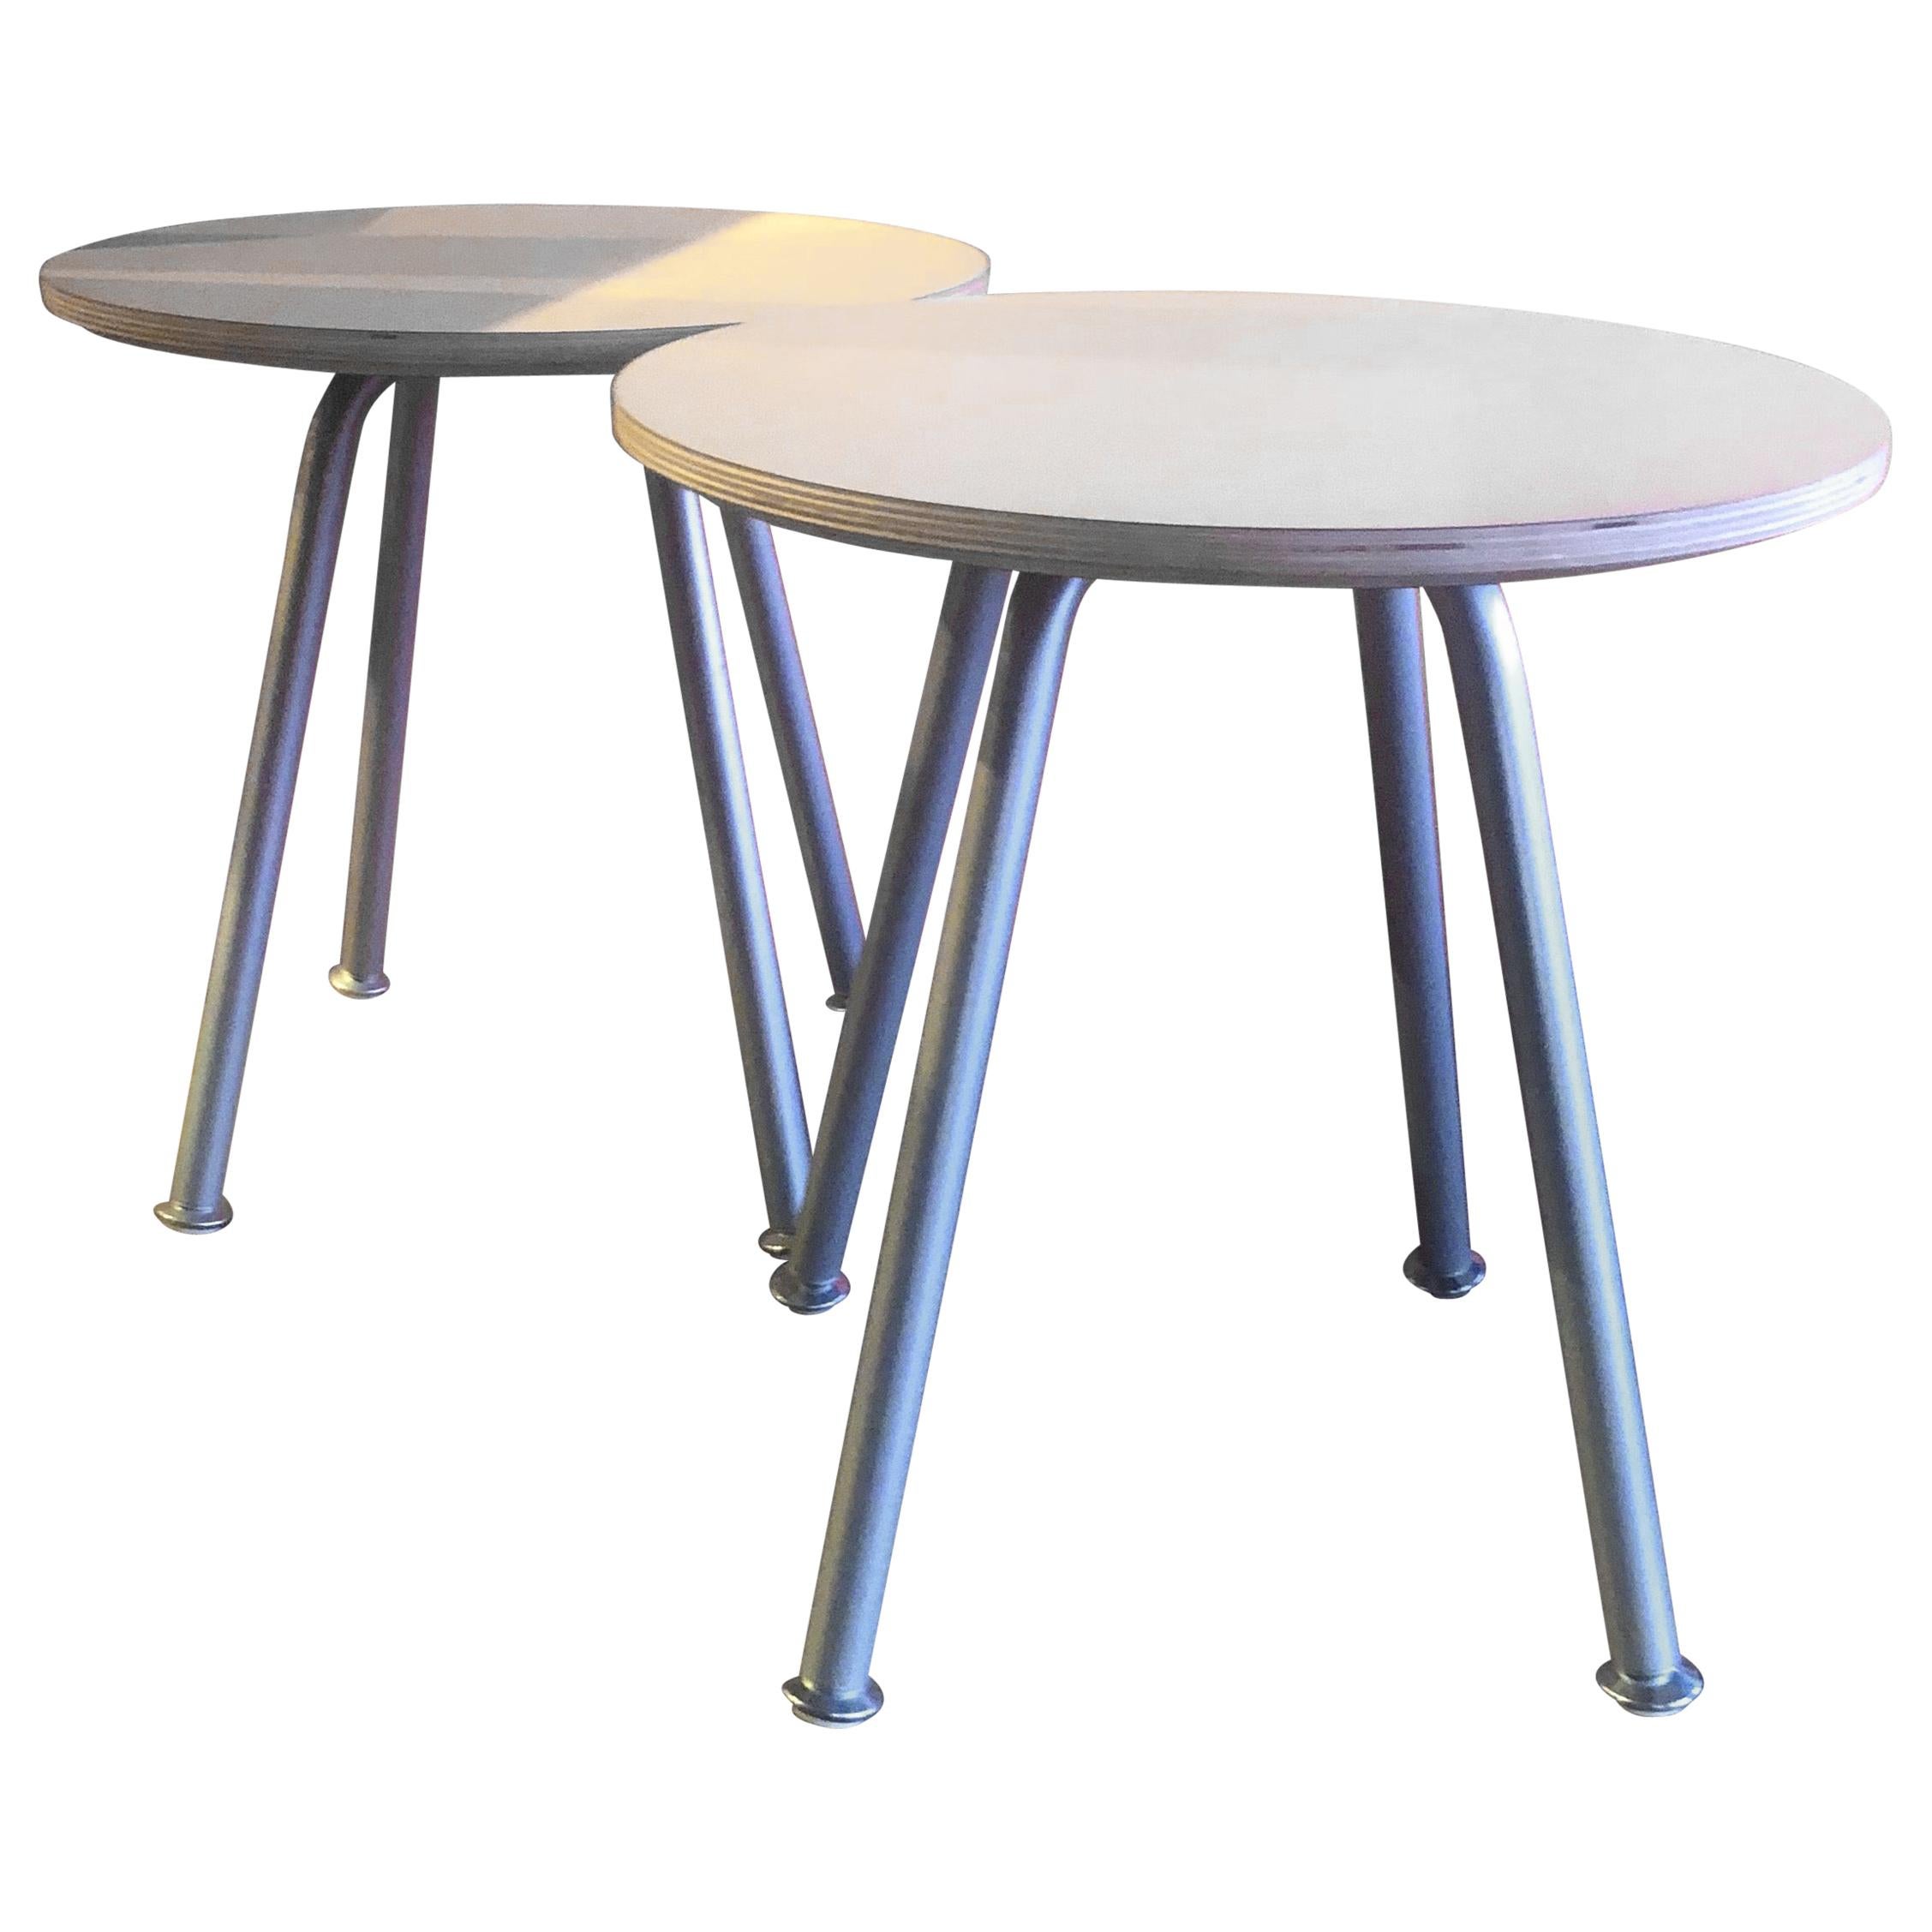 Pair of "Swoop" Tables / Stools by Brian Kane for Herman Miller For Sale